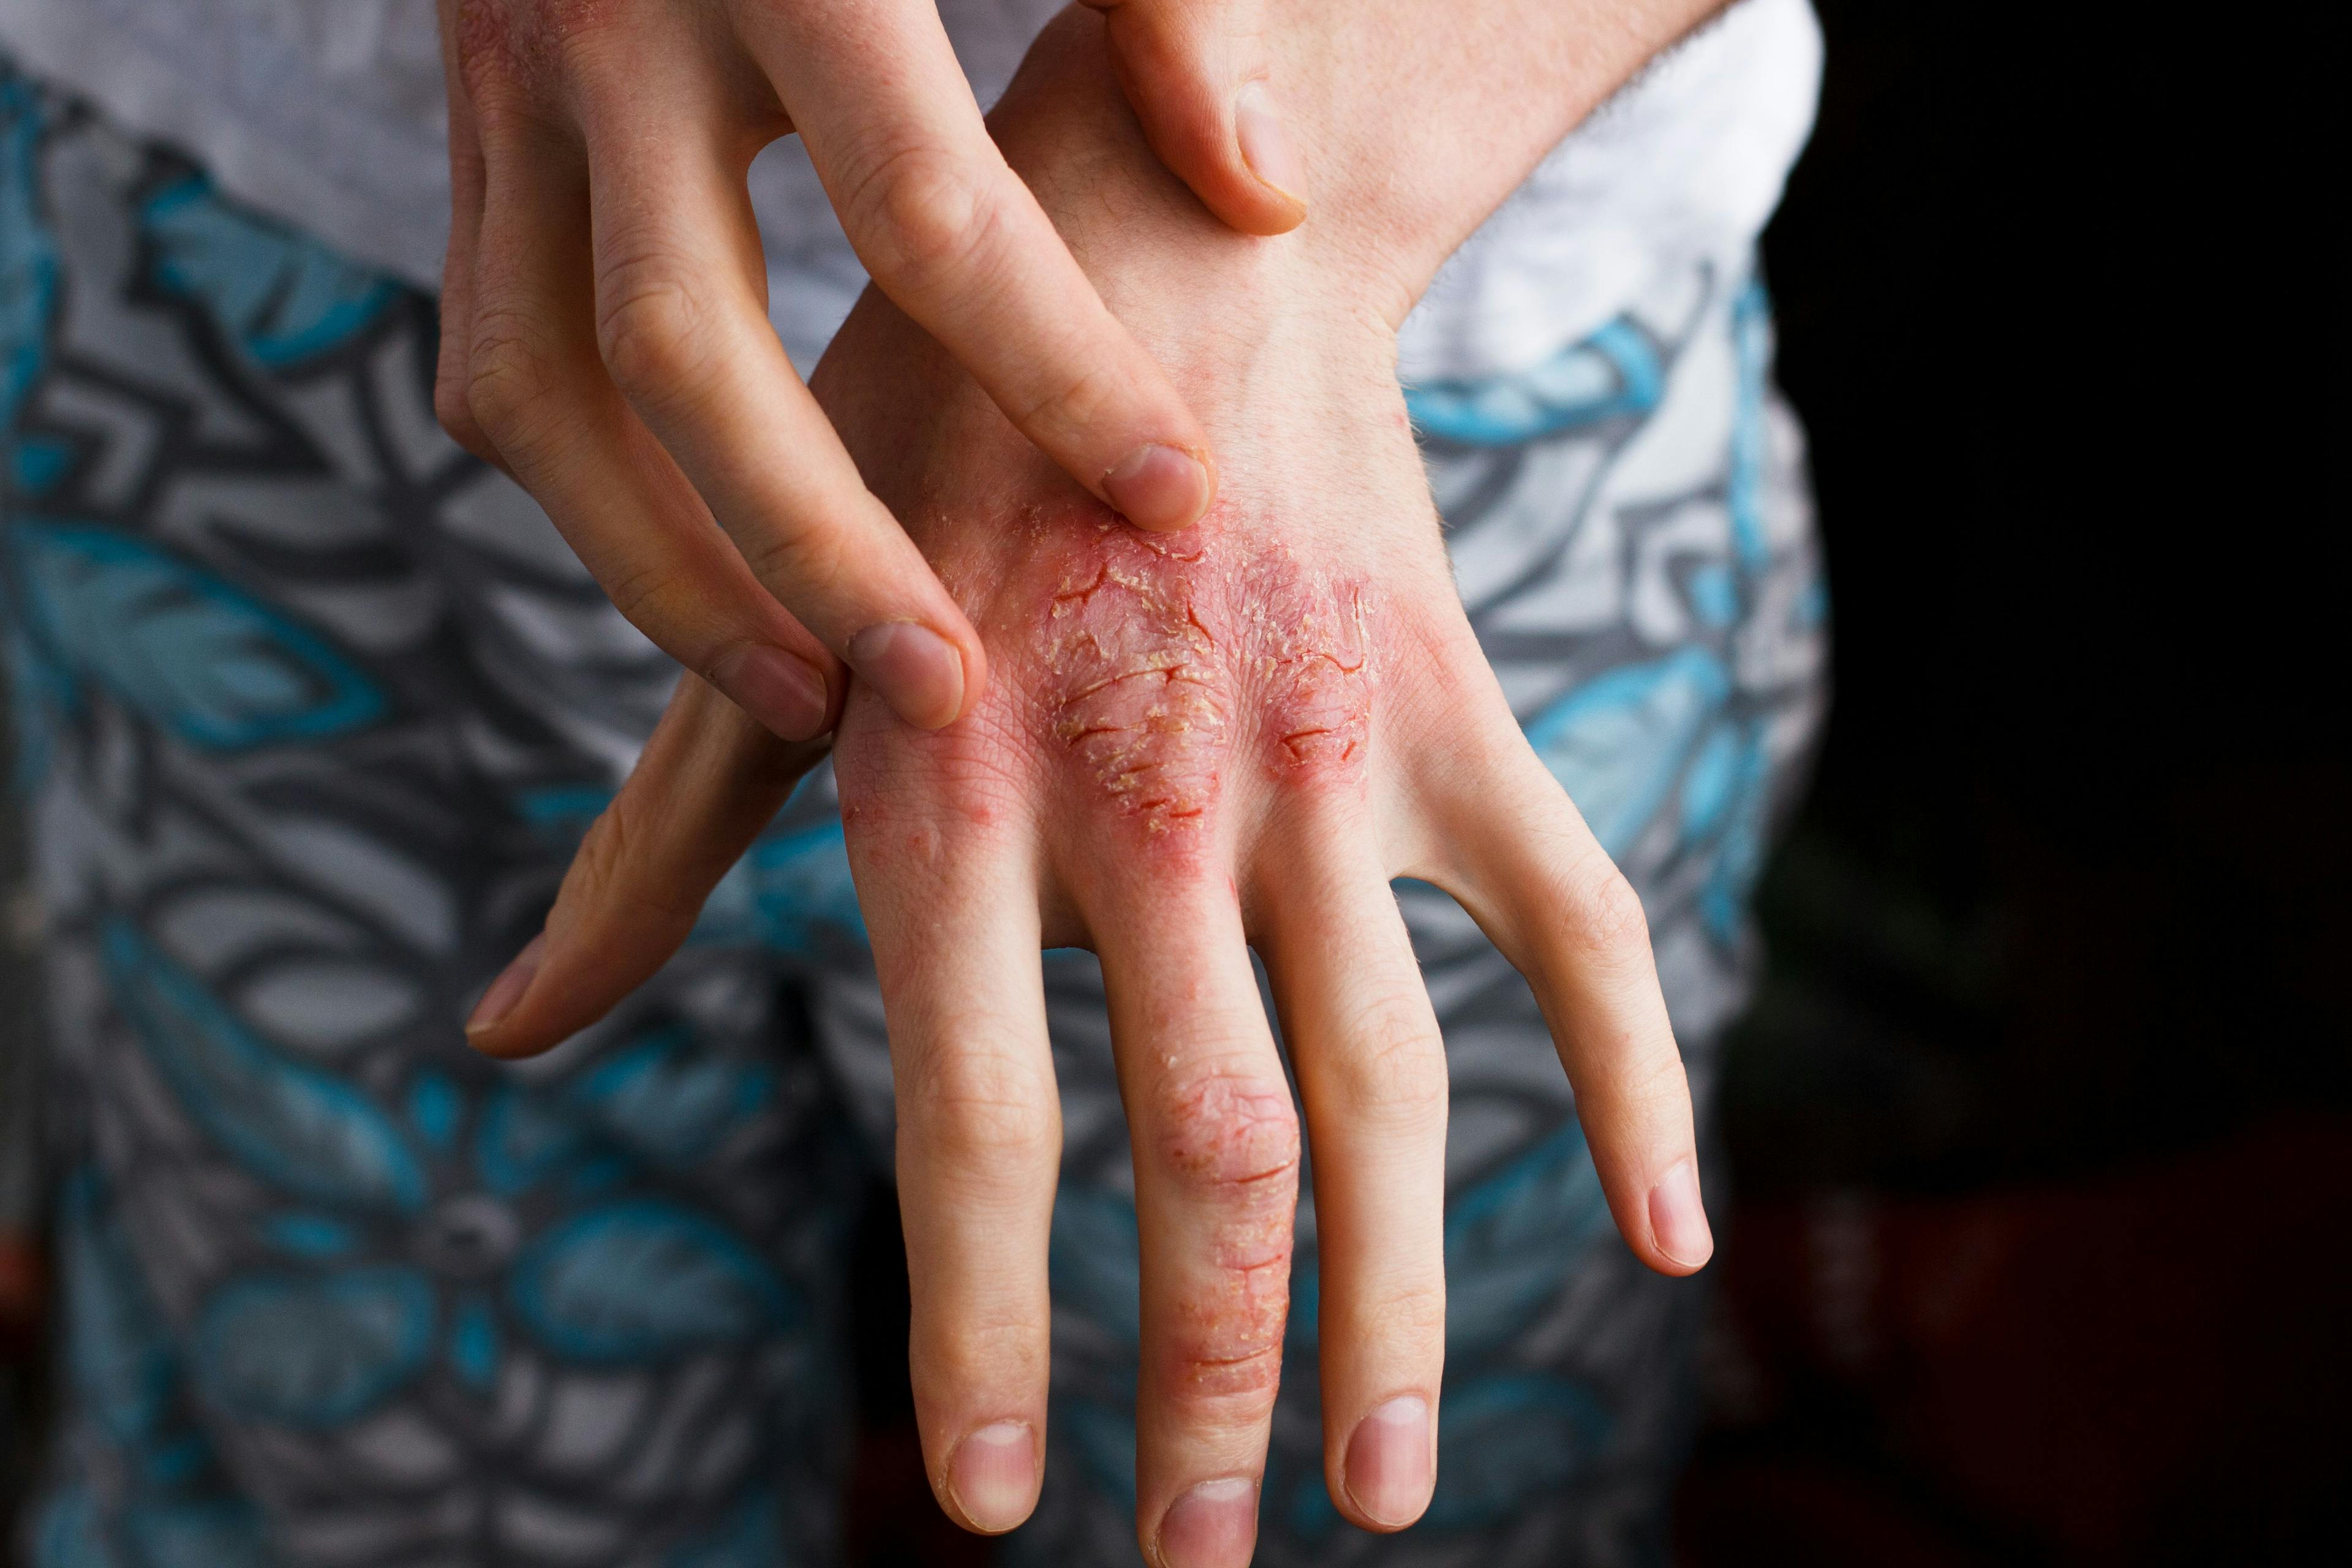 Switching to a Biosimilar from an Originator Deemed Safe and Effective in Psoriasis Treatment